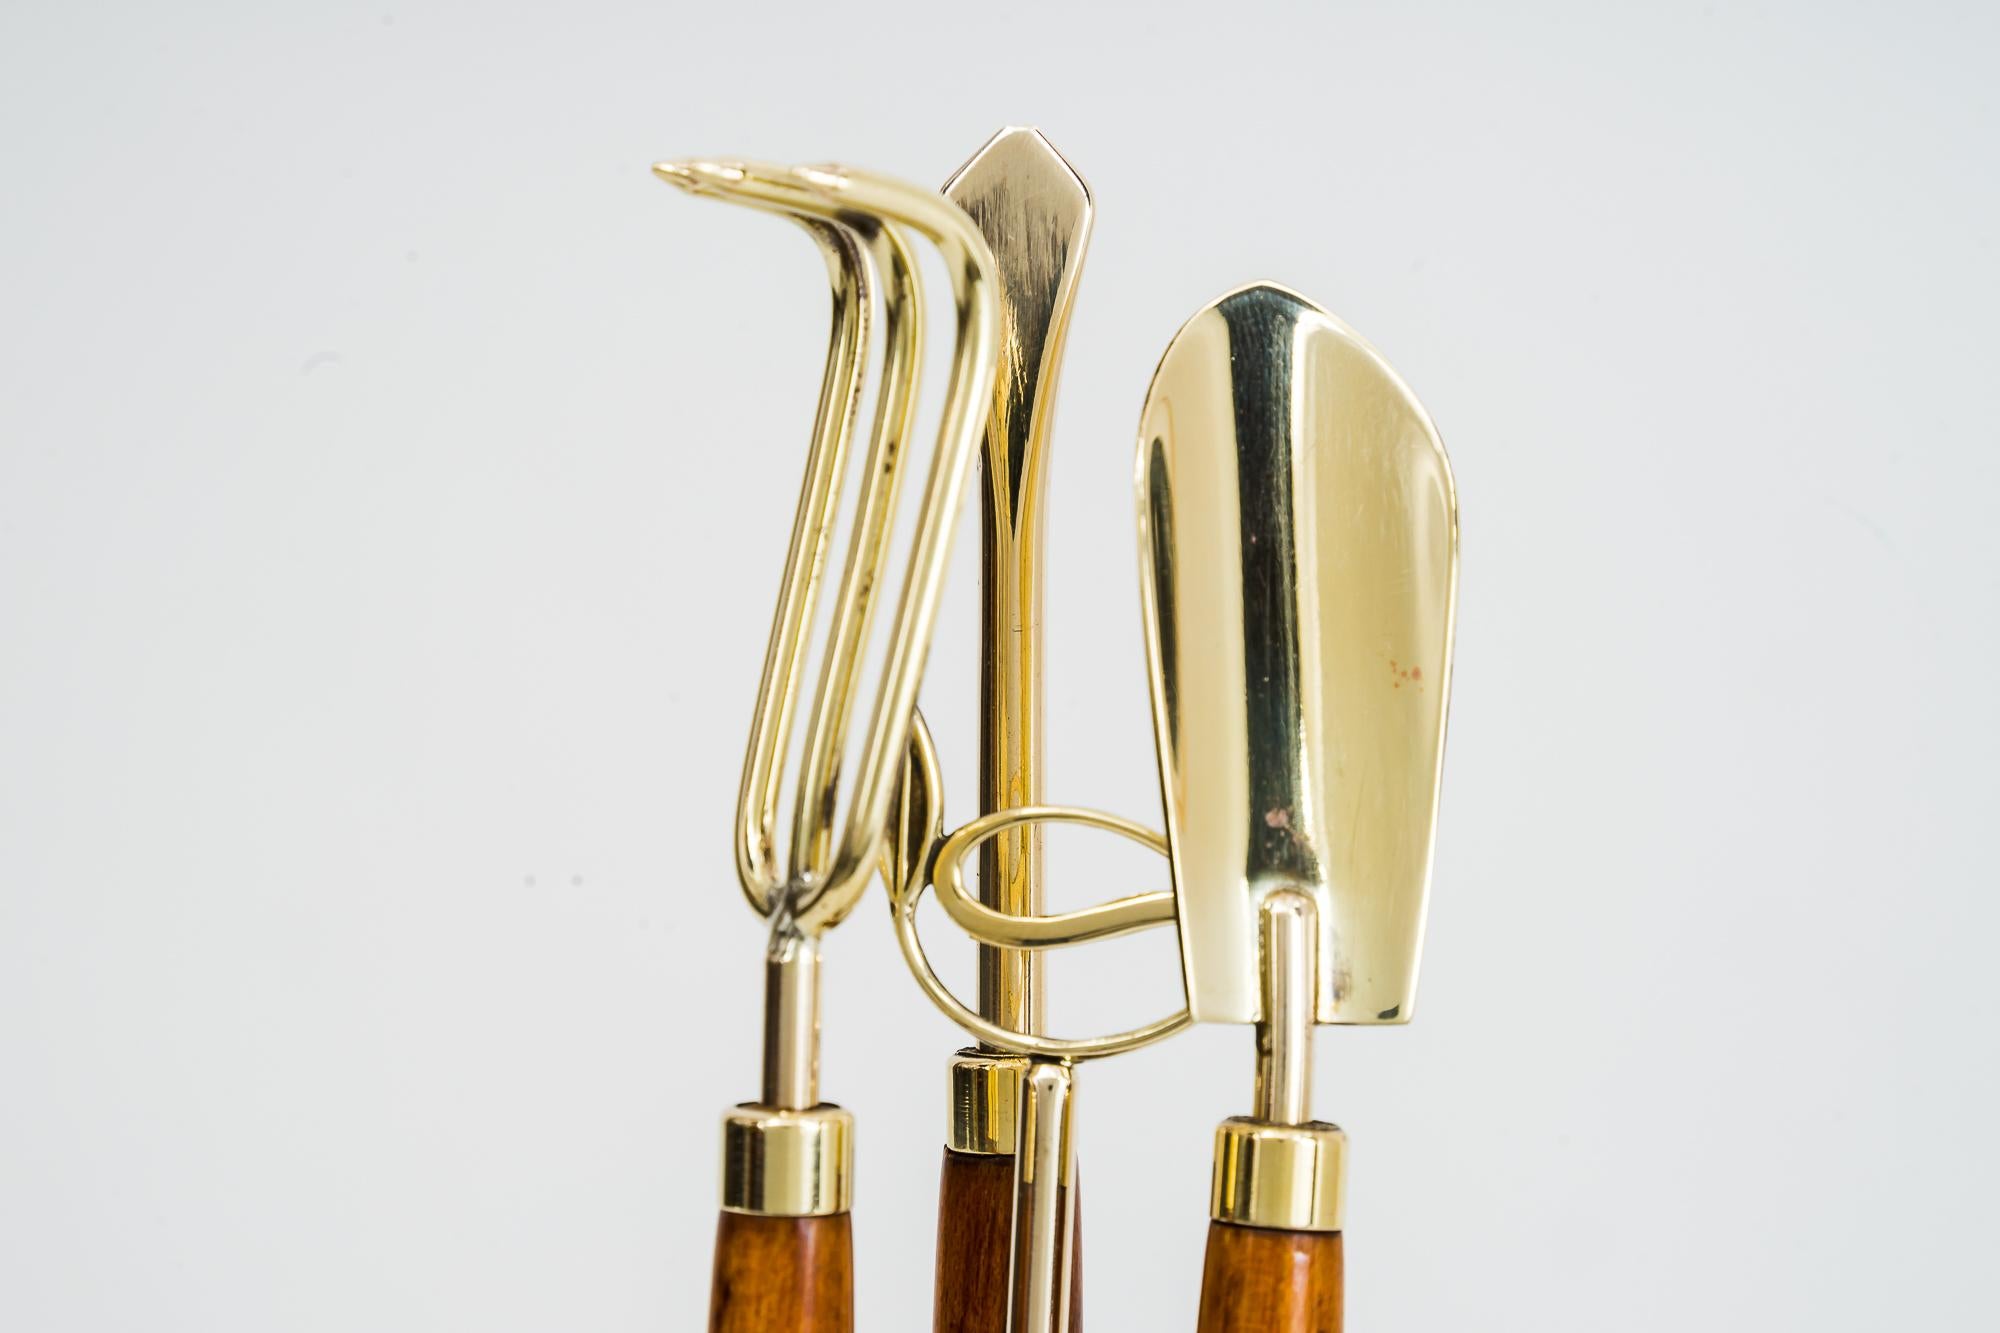 Austrian Mini Garden Tools With Wooden Handles, Set Of 4, 1970's For Sale